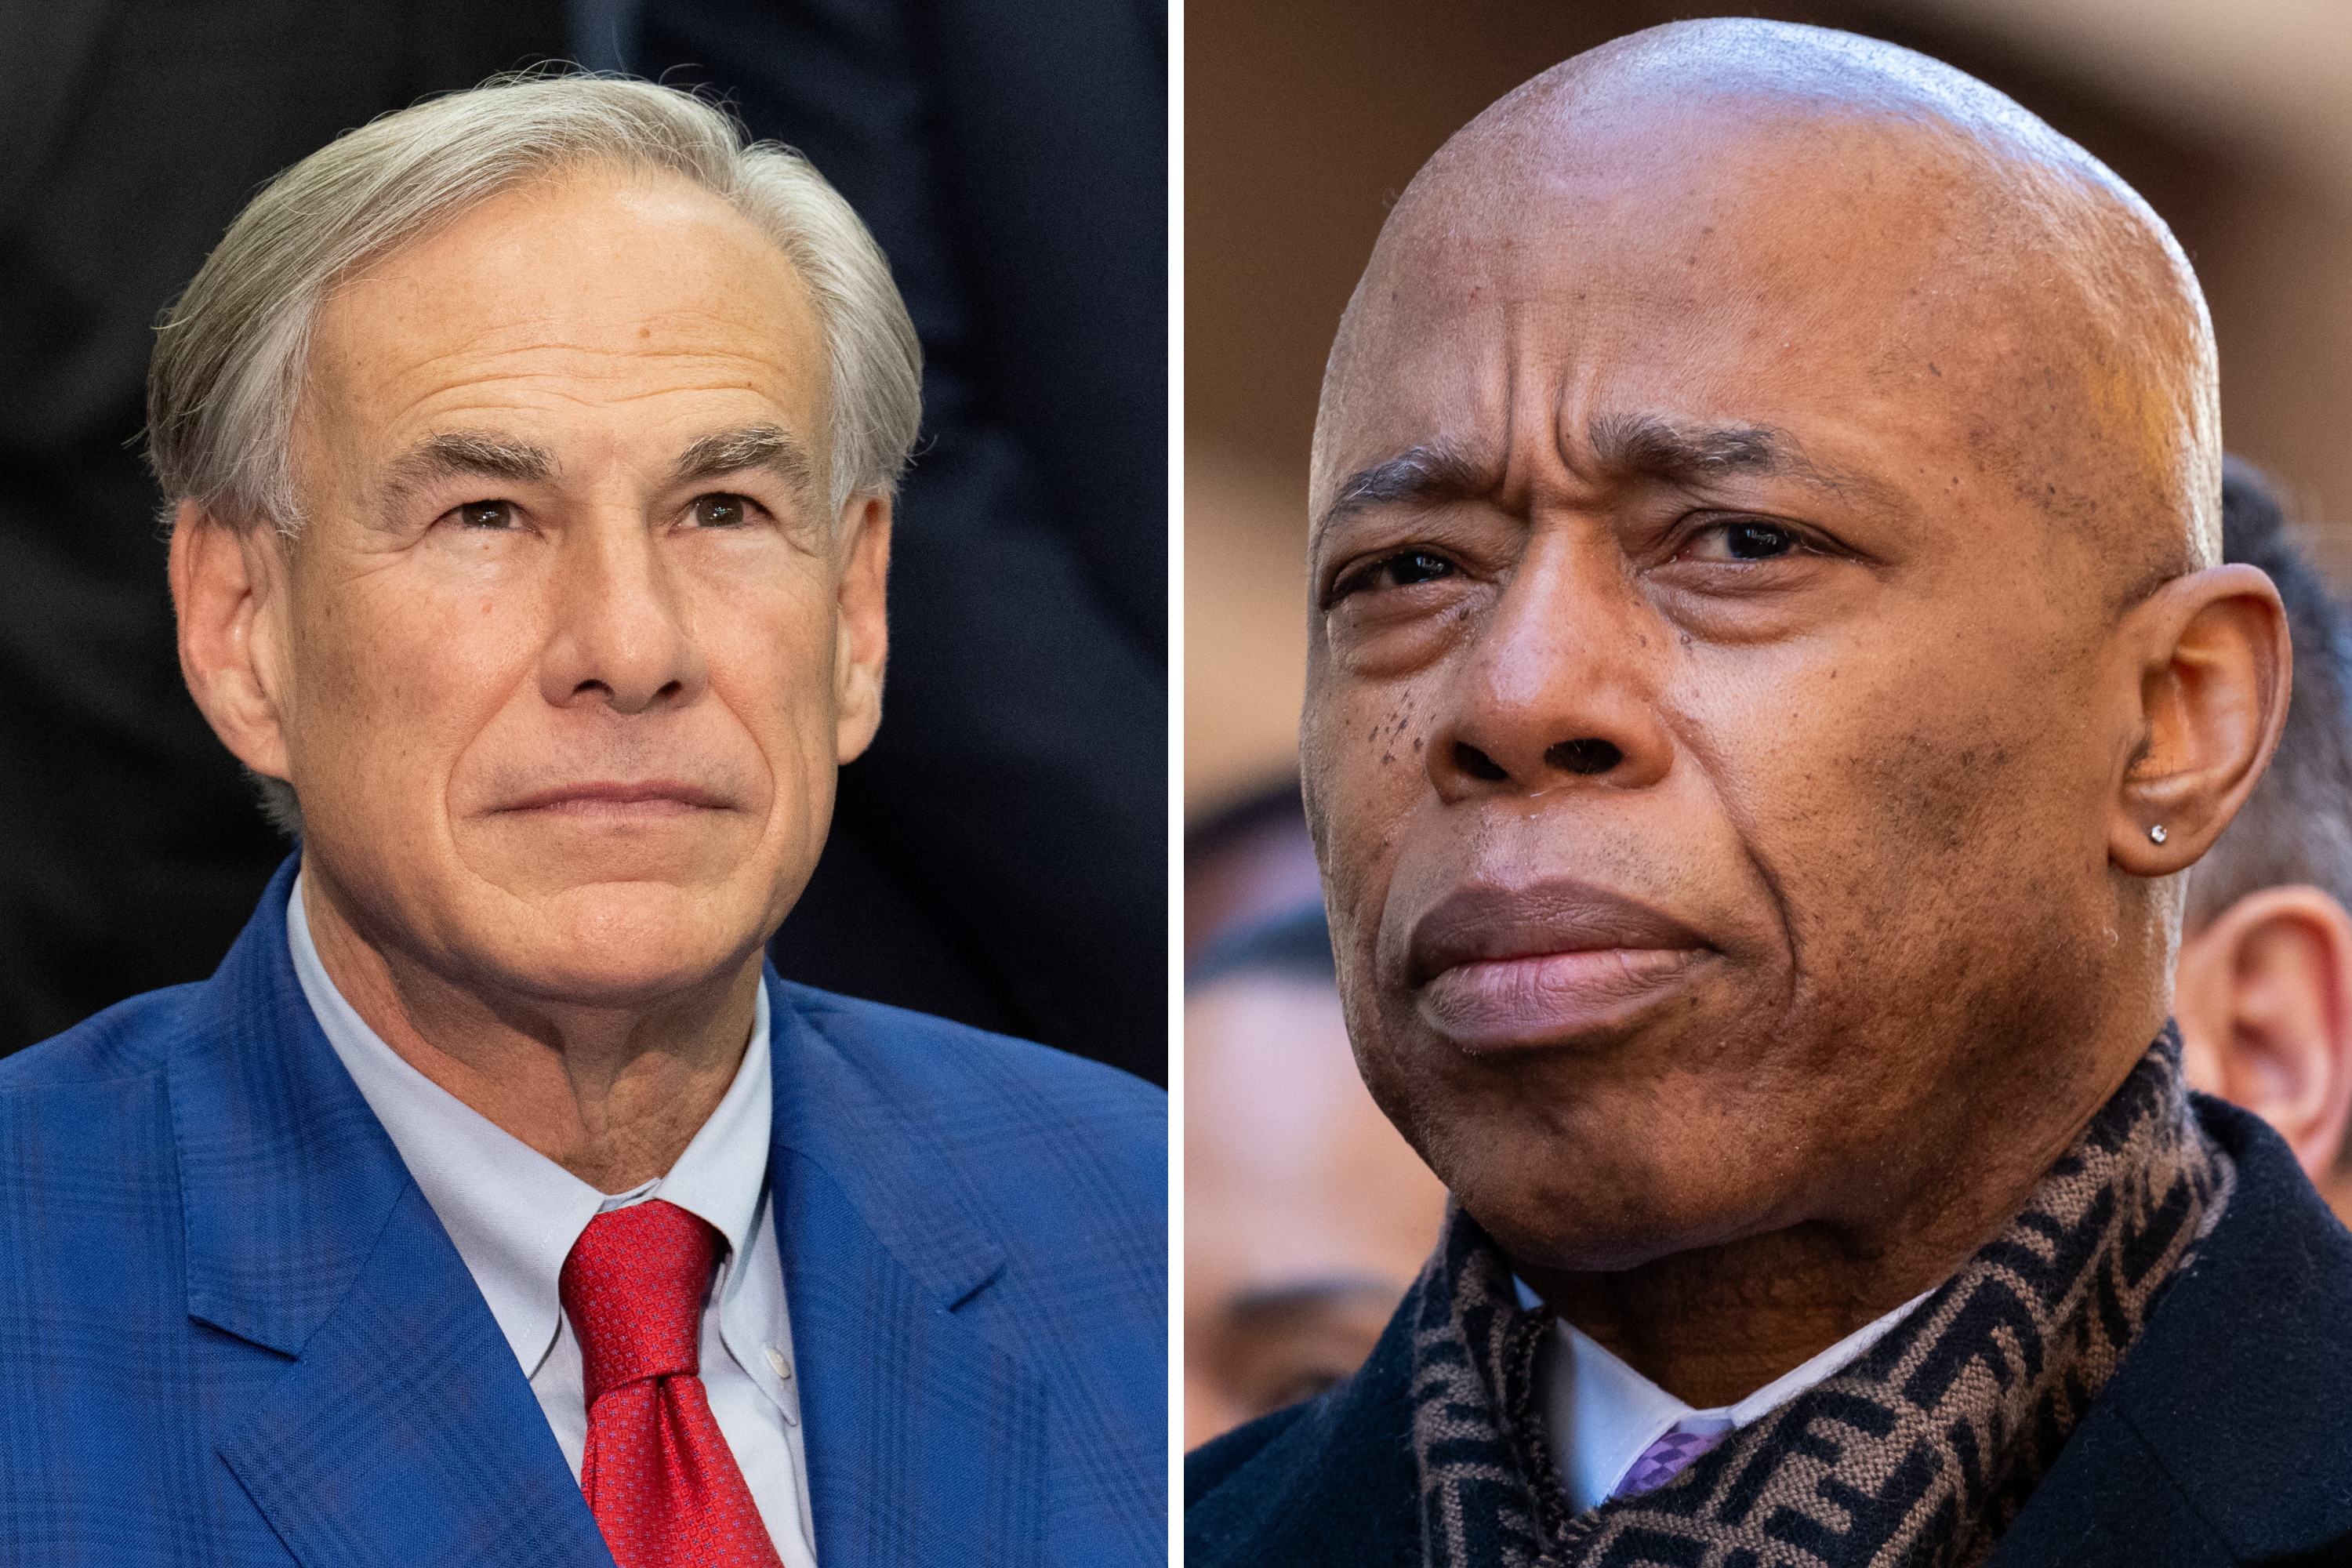 Greg Abbott accuses Eric Adams of “aiding and abetting” immigration crisis